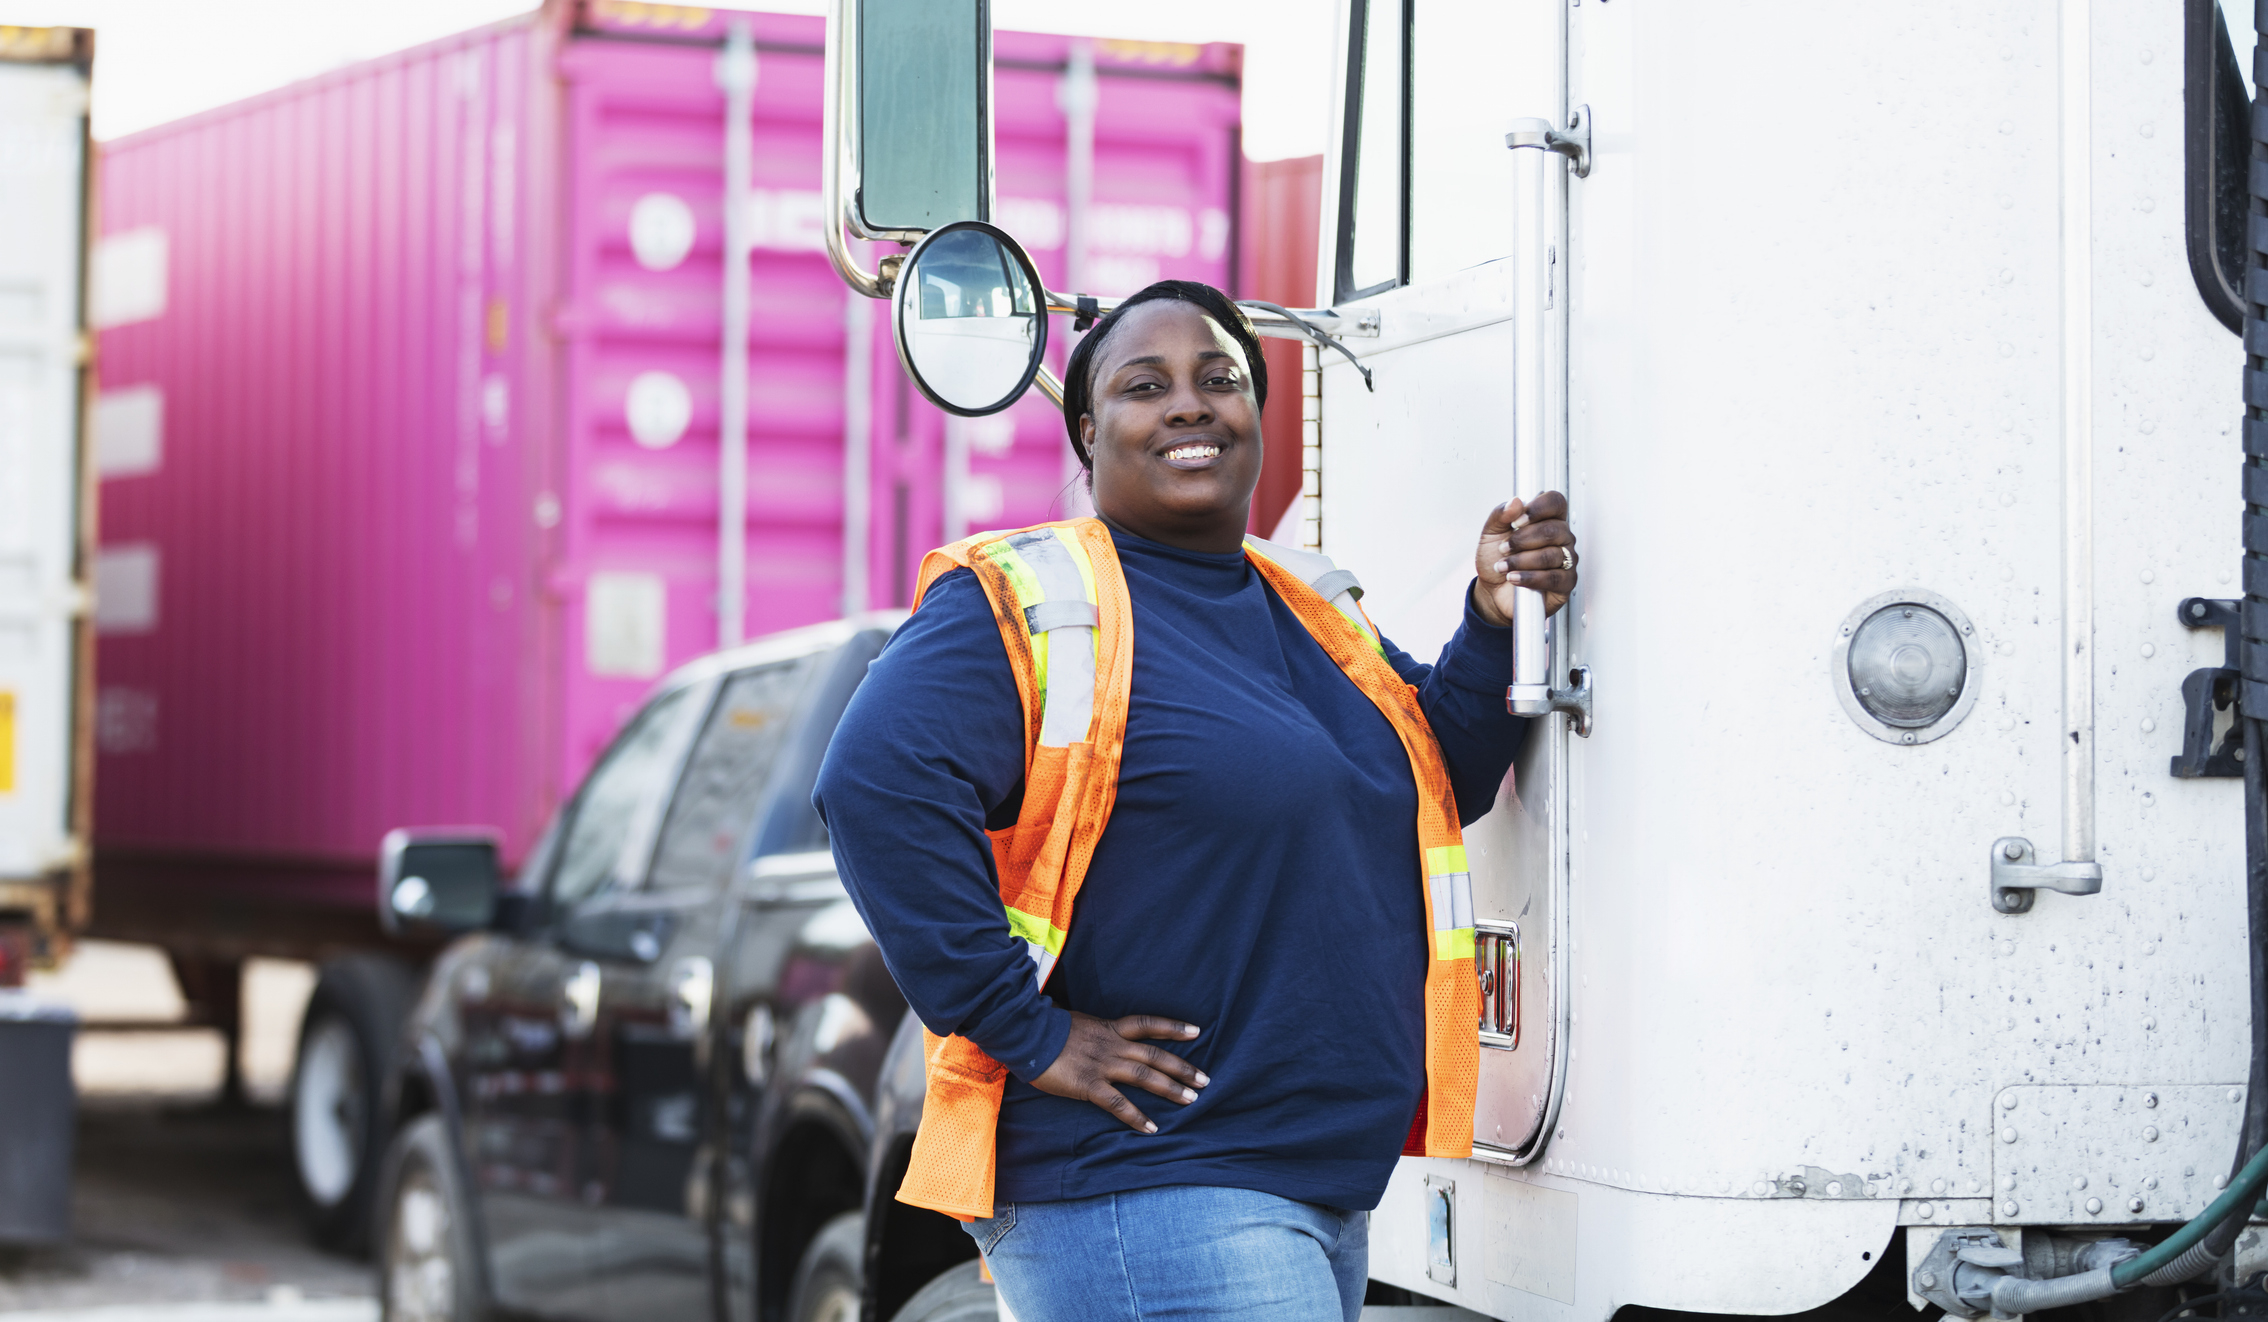 A confident worker in a safety vest stands by a truck, hand on hip, promoting women in transport